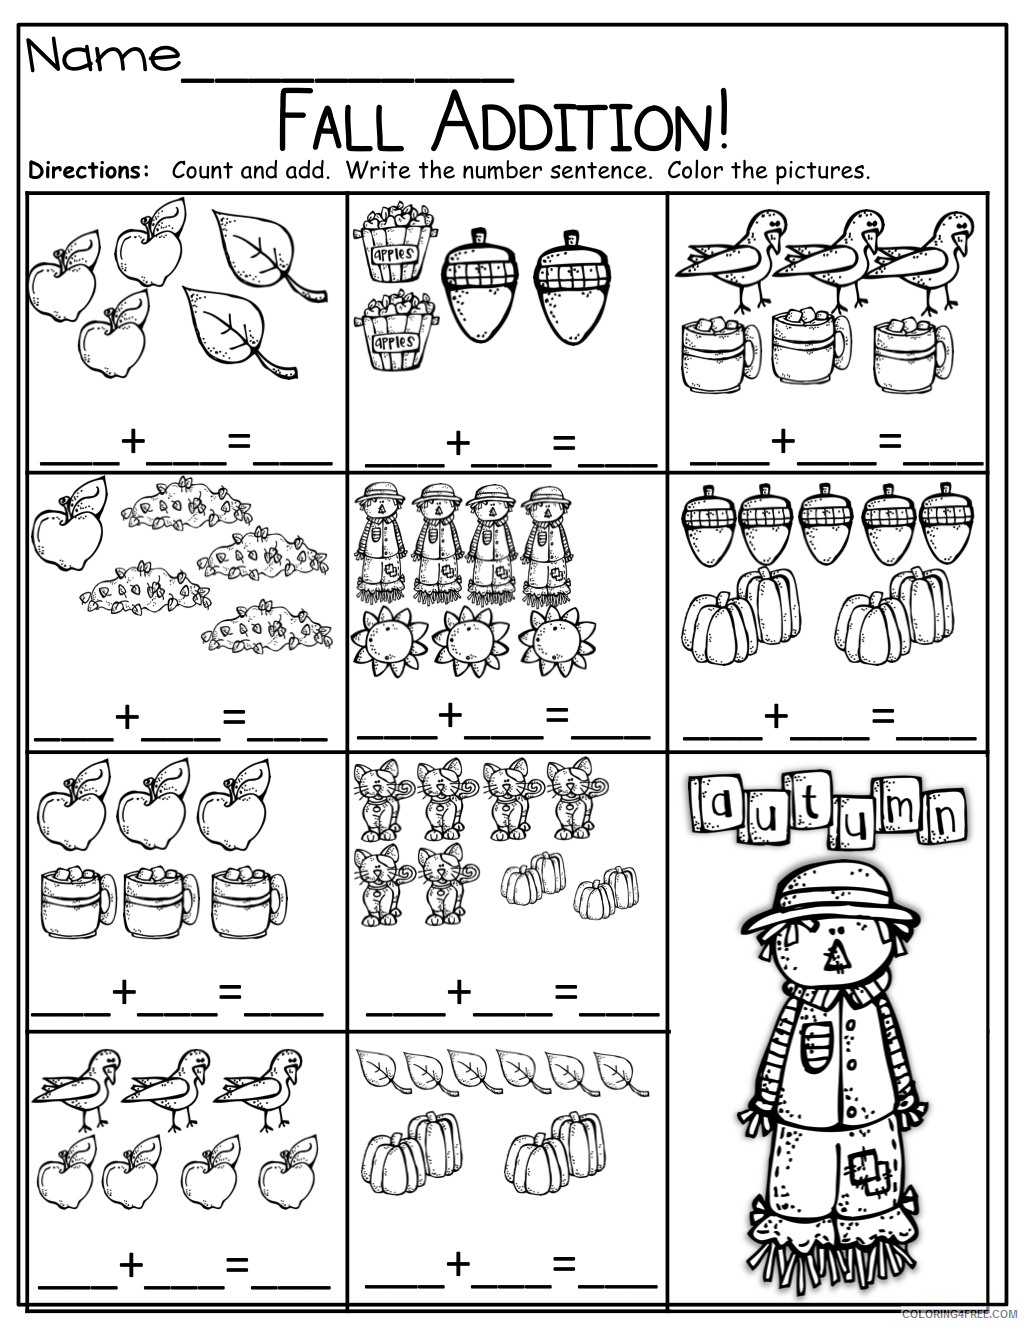 Addition Coloring Pages Educational Fall Kindergarten Math Worksheets 2020 0569 Coloring4free